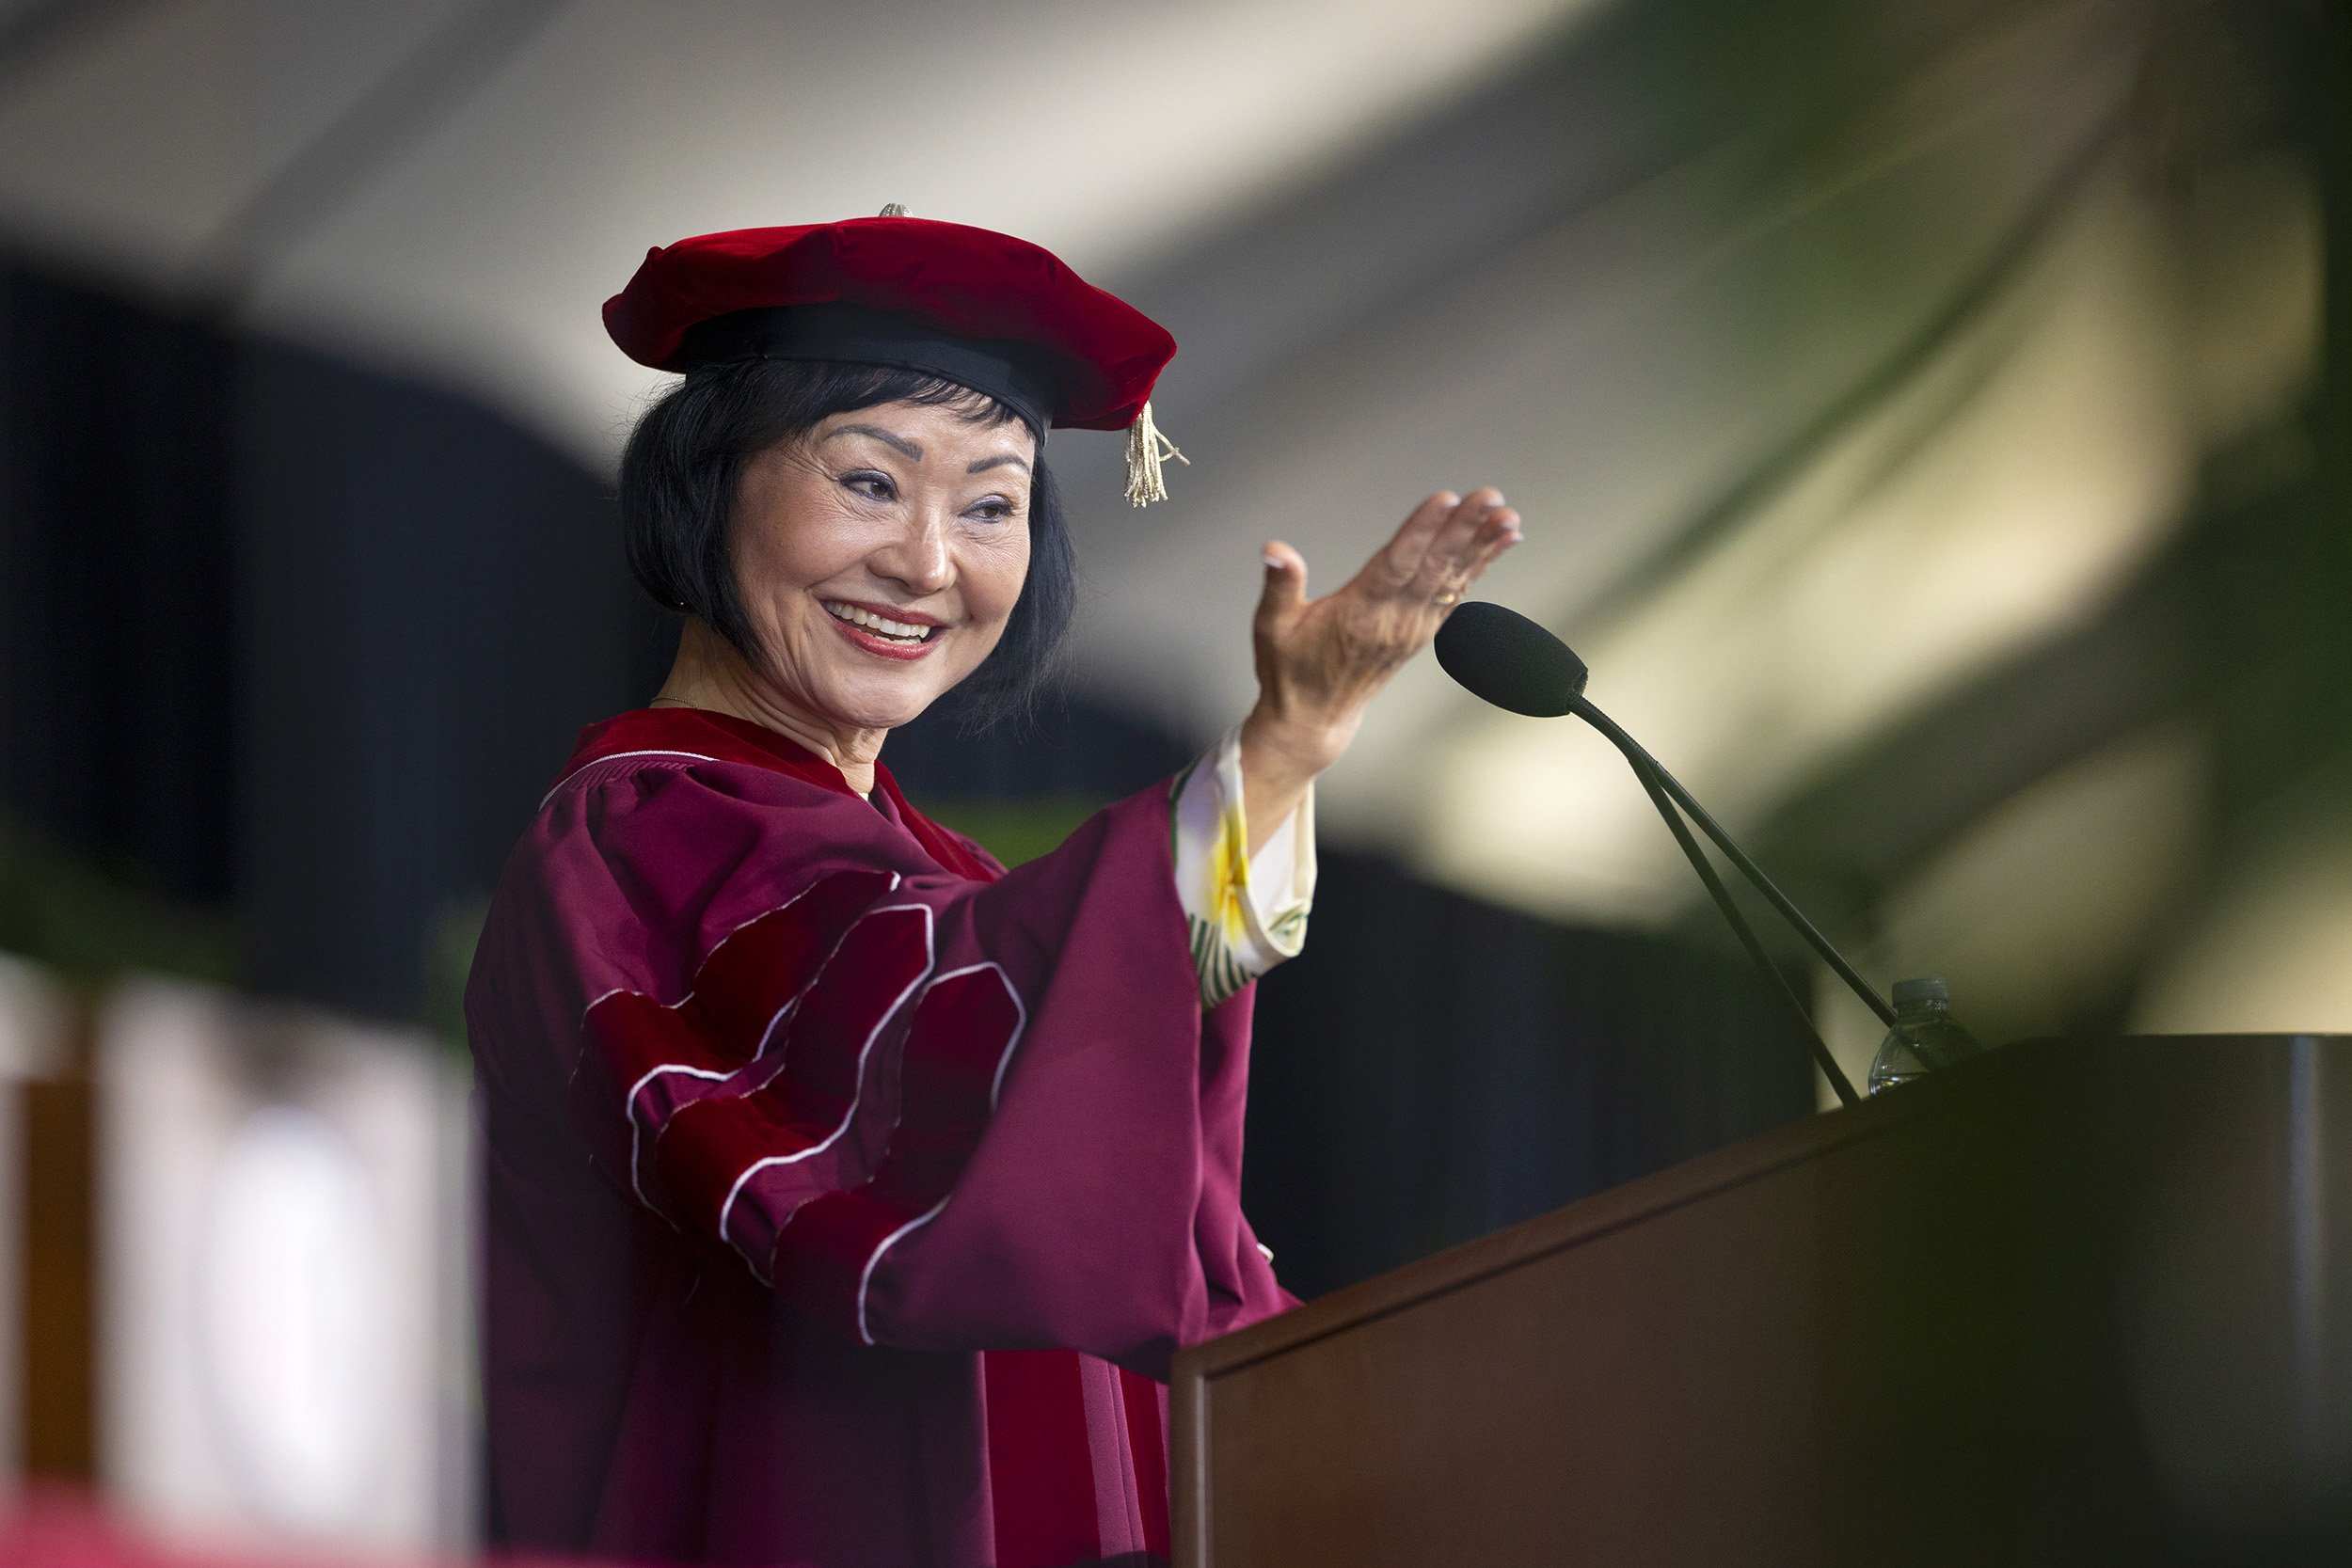 Dr. Phan Thi Kim Phuc, UNESCO goodwill ambassador and founder of KIM Foundation International delivers her keynote address at CMC's commencement for the classes of 2020 and 2021.